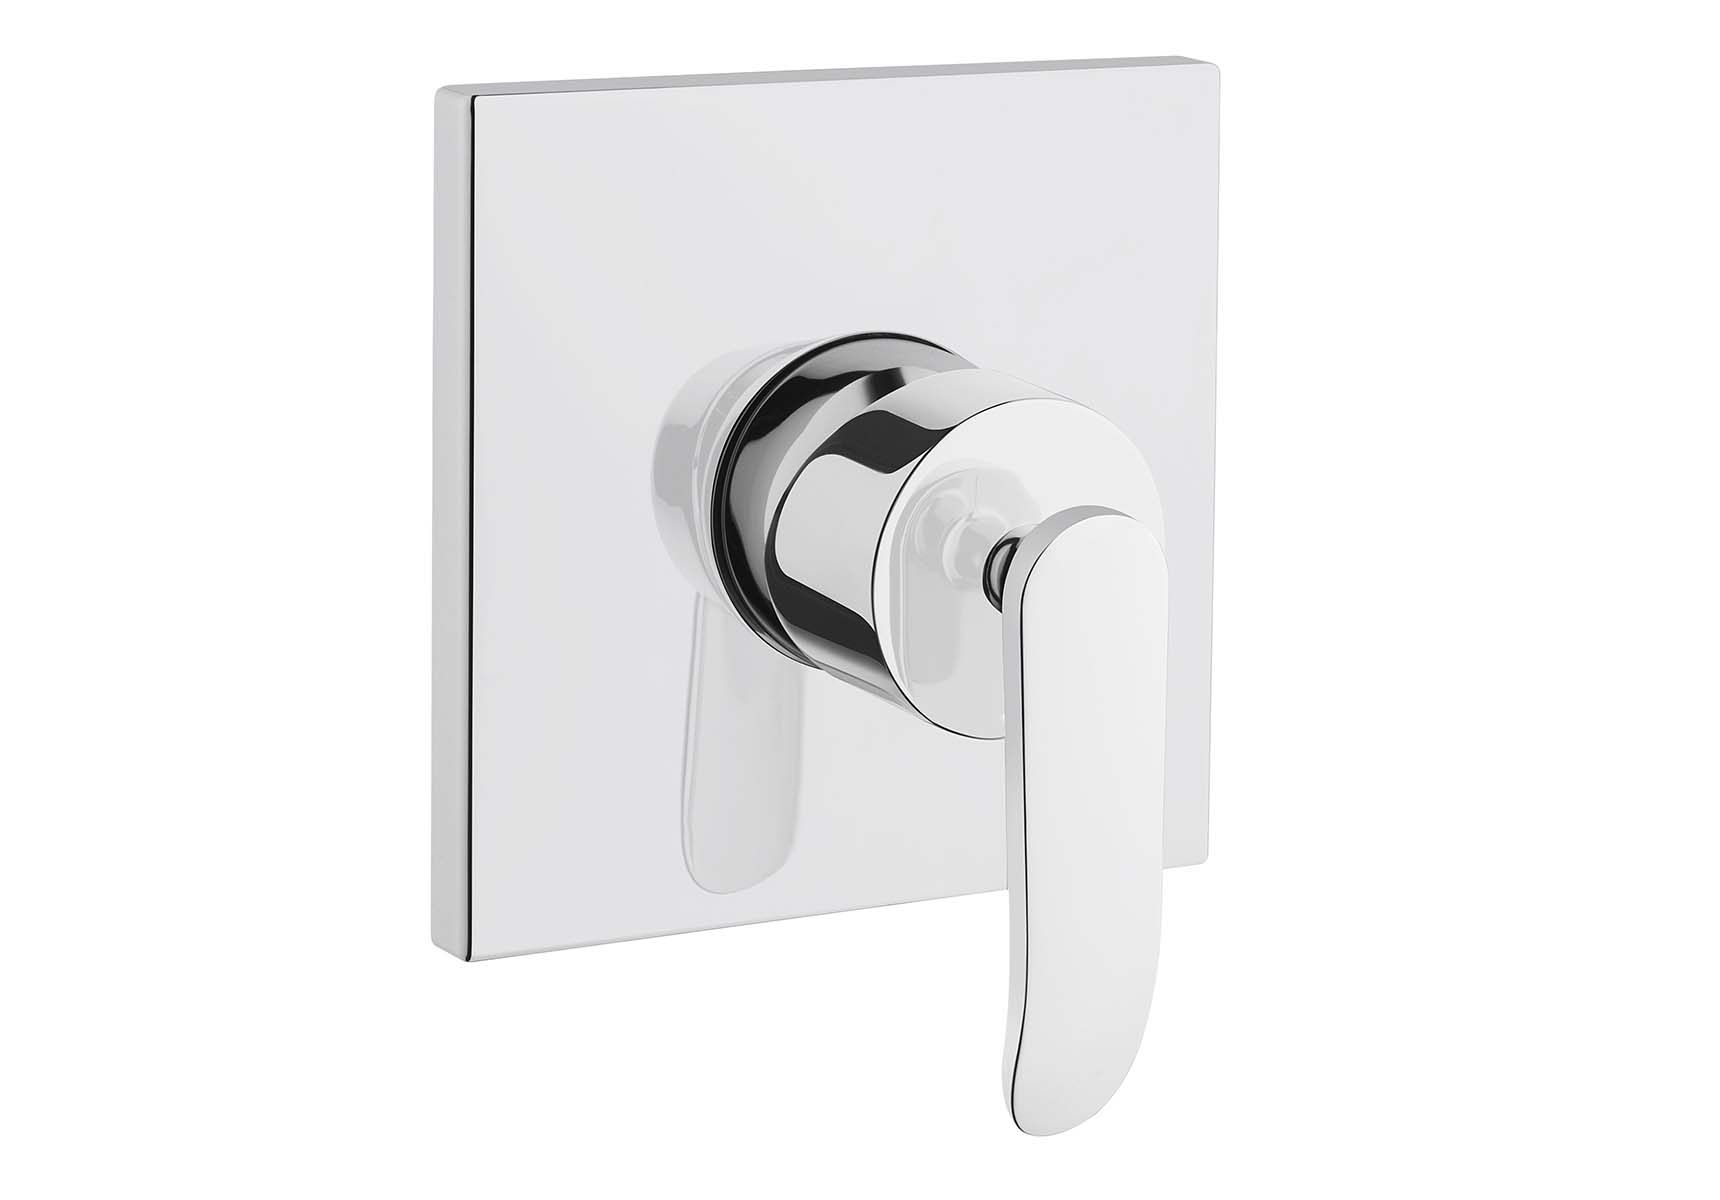 T4 Built-In Shower Mixer (Exposed Part)